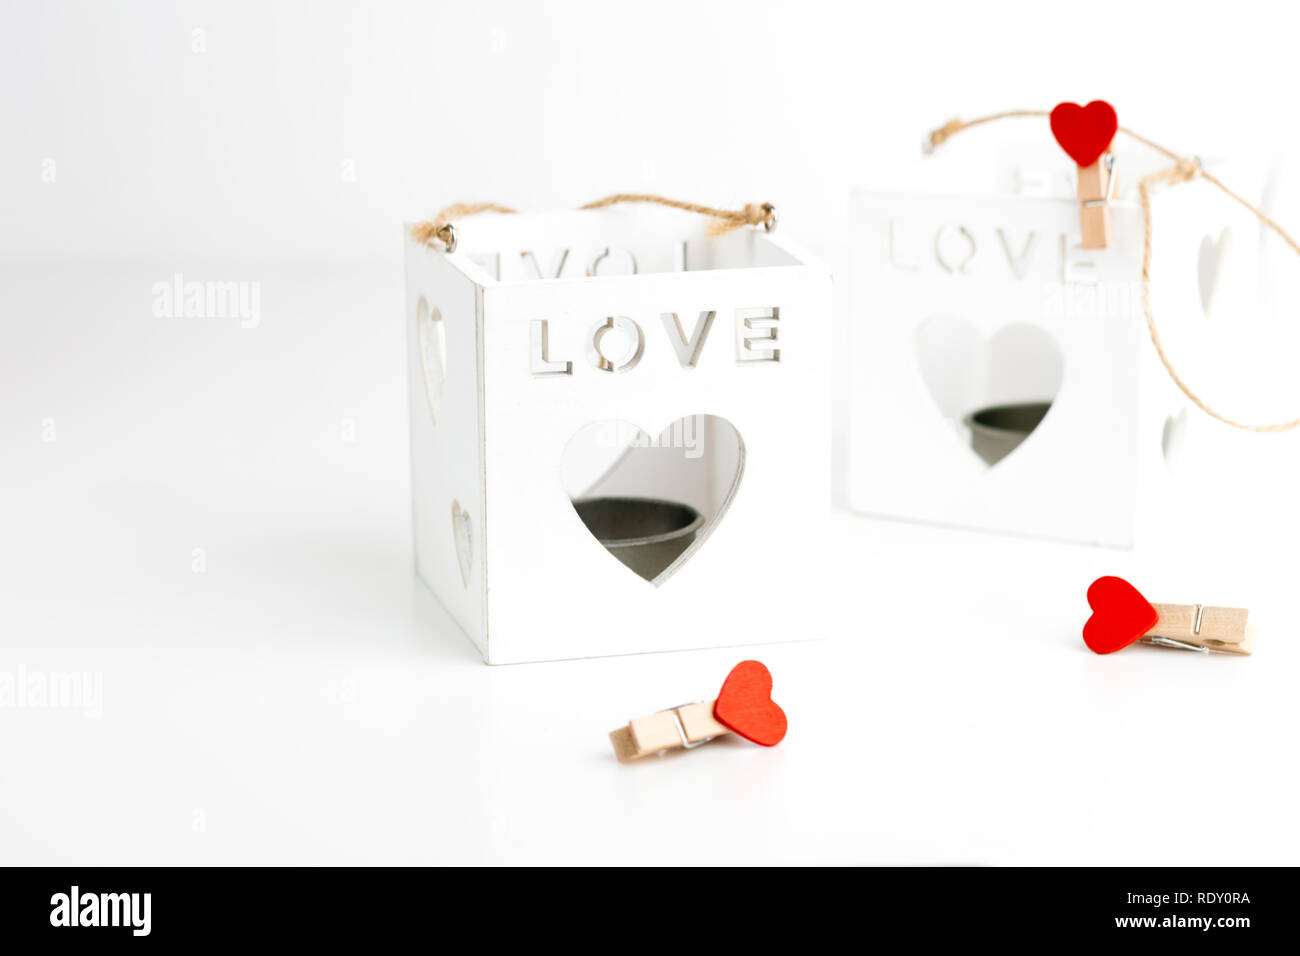 Two cube candlesticks on white with hearts. Valentines Day concept. Stock Photo